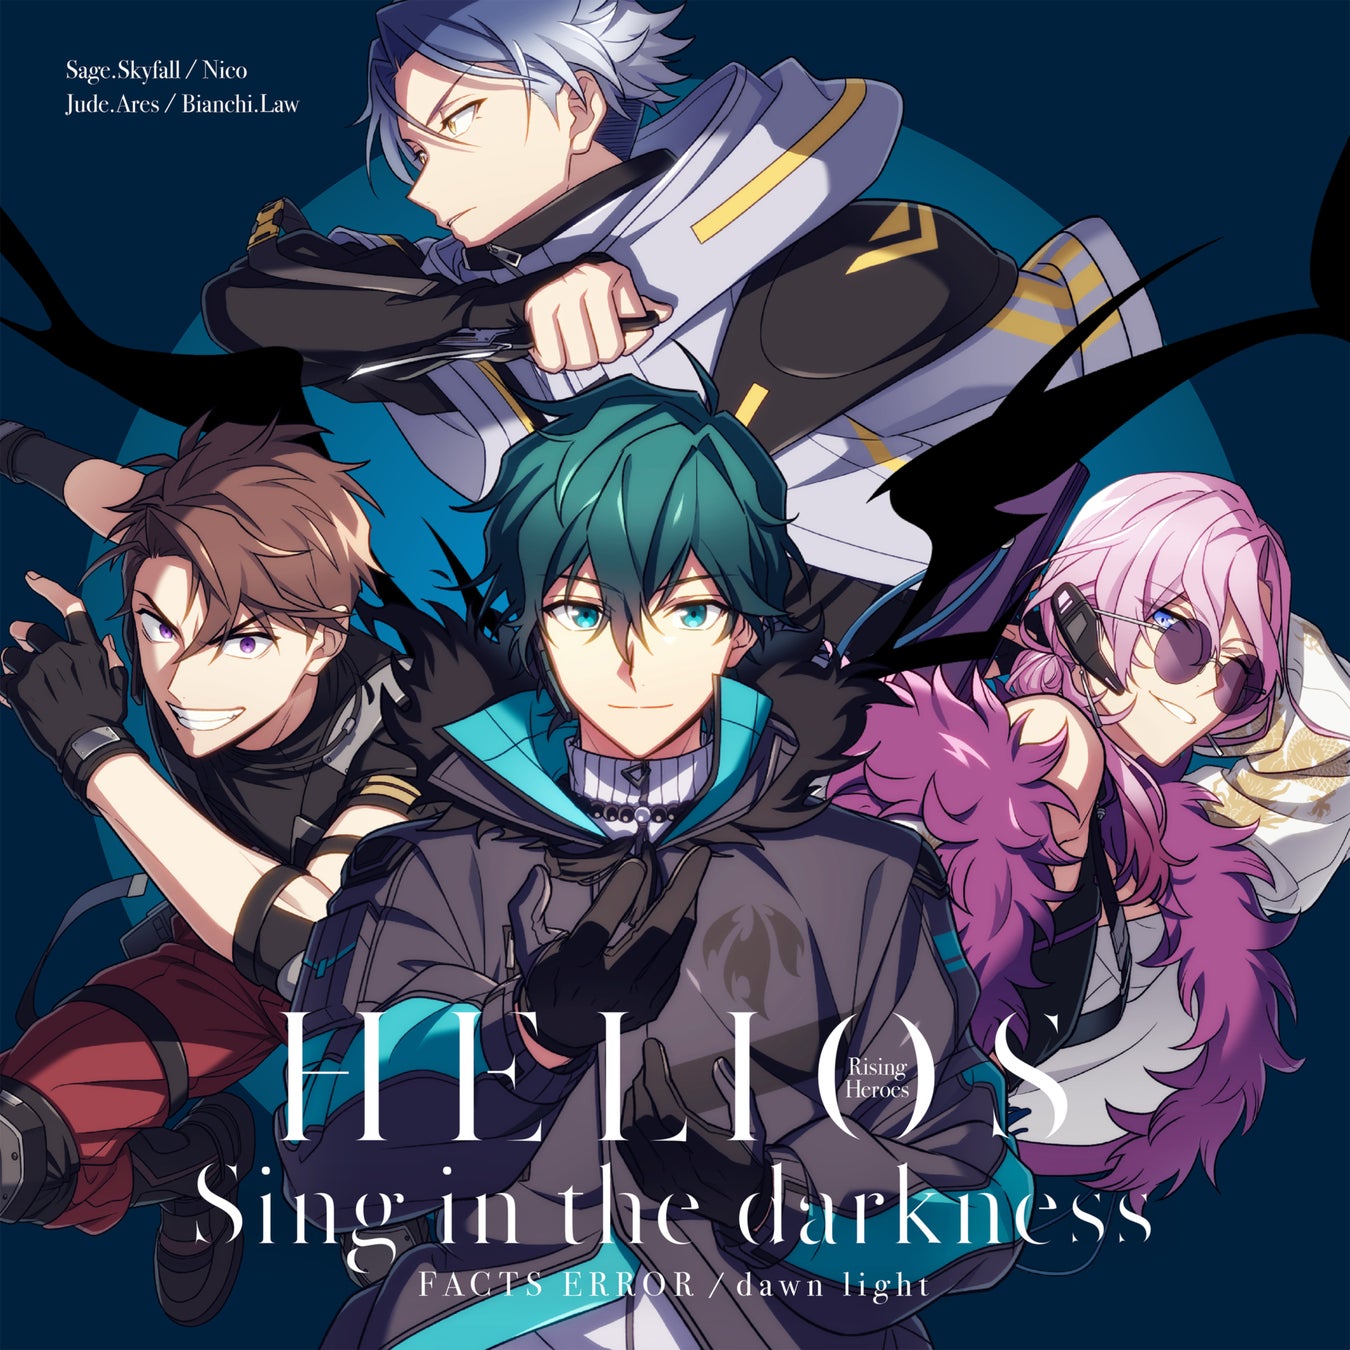 『HELIOS Rising Heroes』 Sing in the darkness 「FACTS ERROR」／「dawn light」本日発売！！